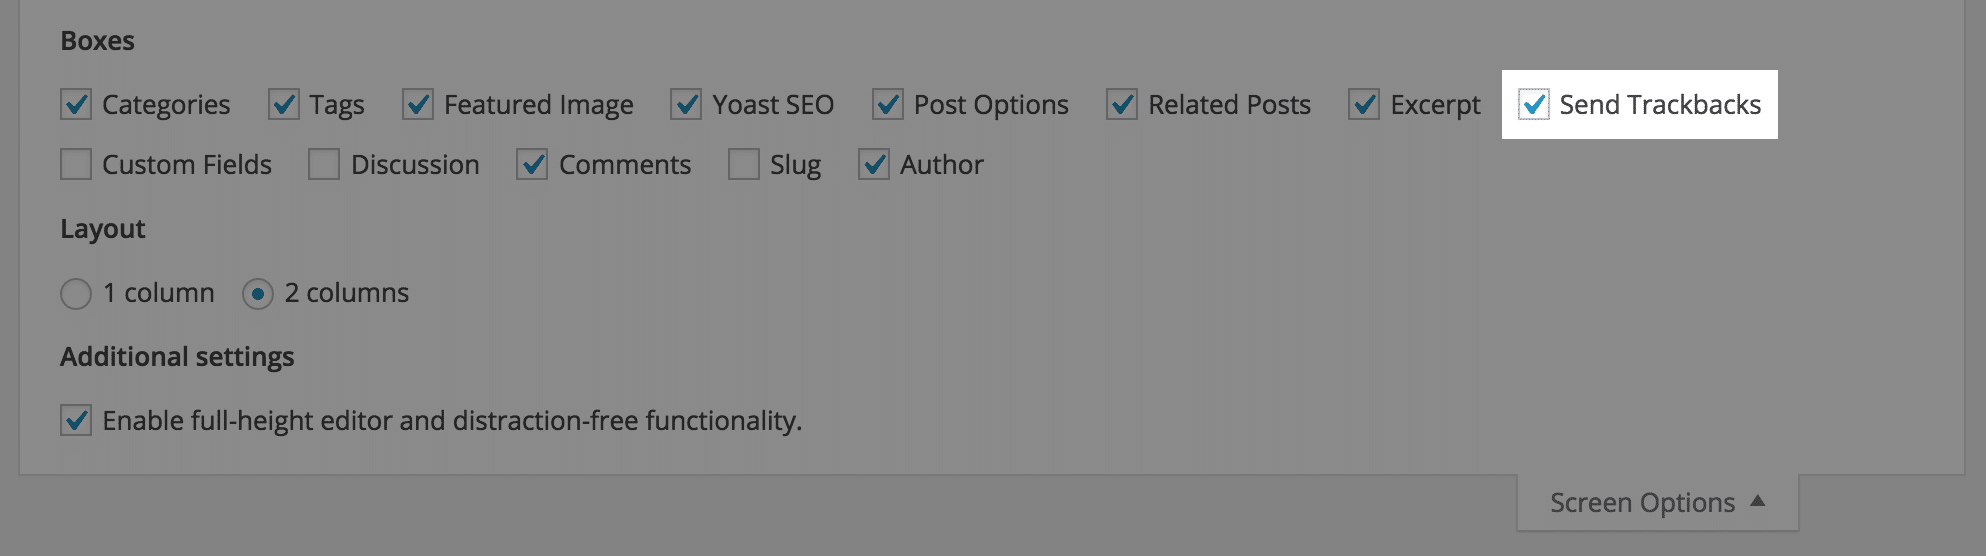 Trackback view setting in WordPress screen options section